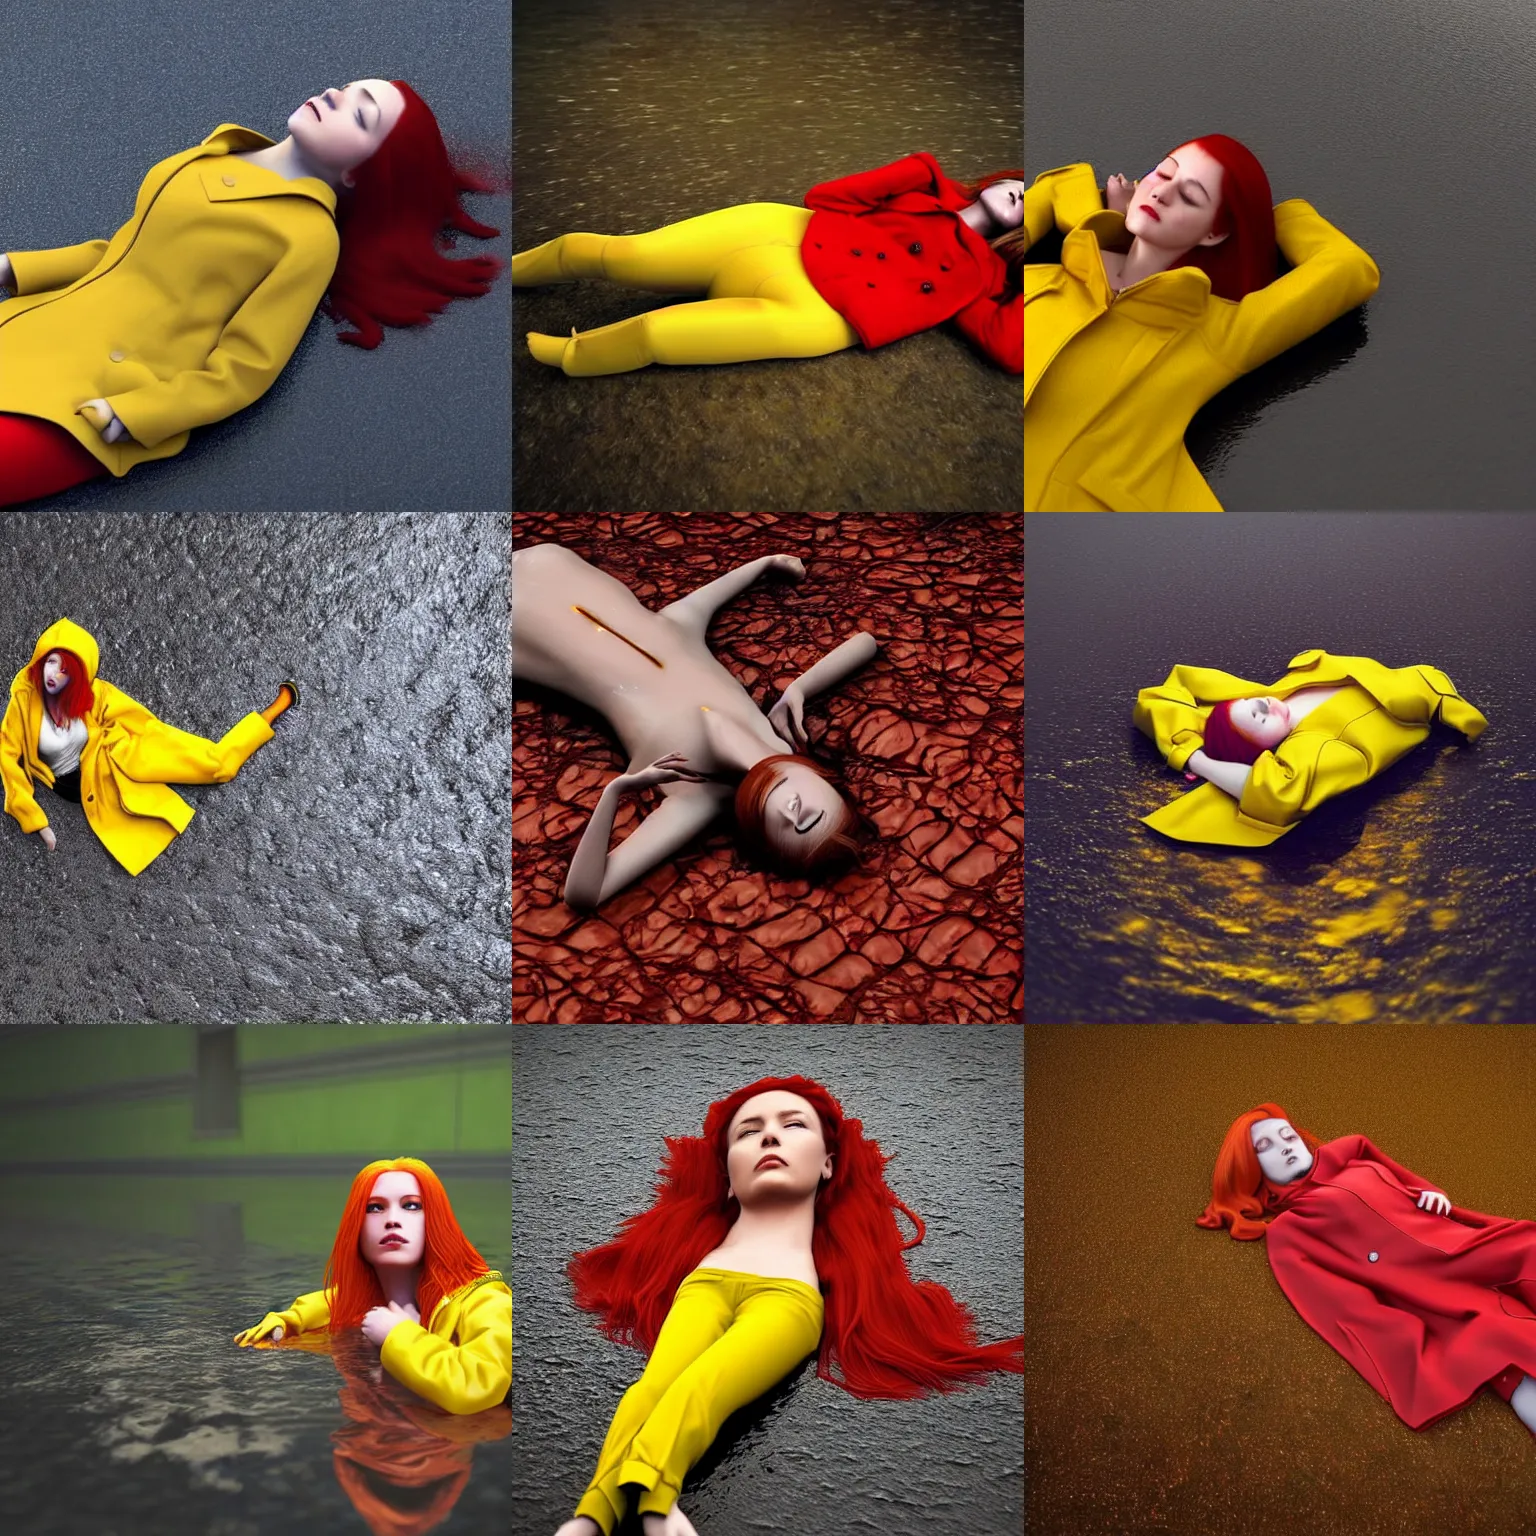 Prompt: A dramatic portrait of a red haired girl in a yellow raincoat, lying on her back in puddles of water on a dark surface, photorealistic, detailed, 3d render